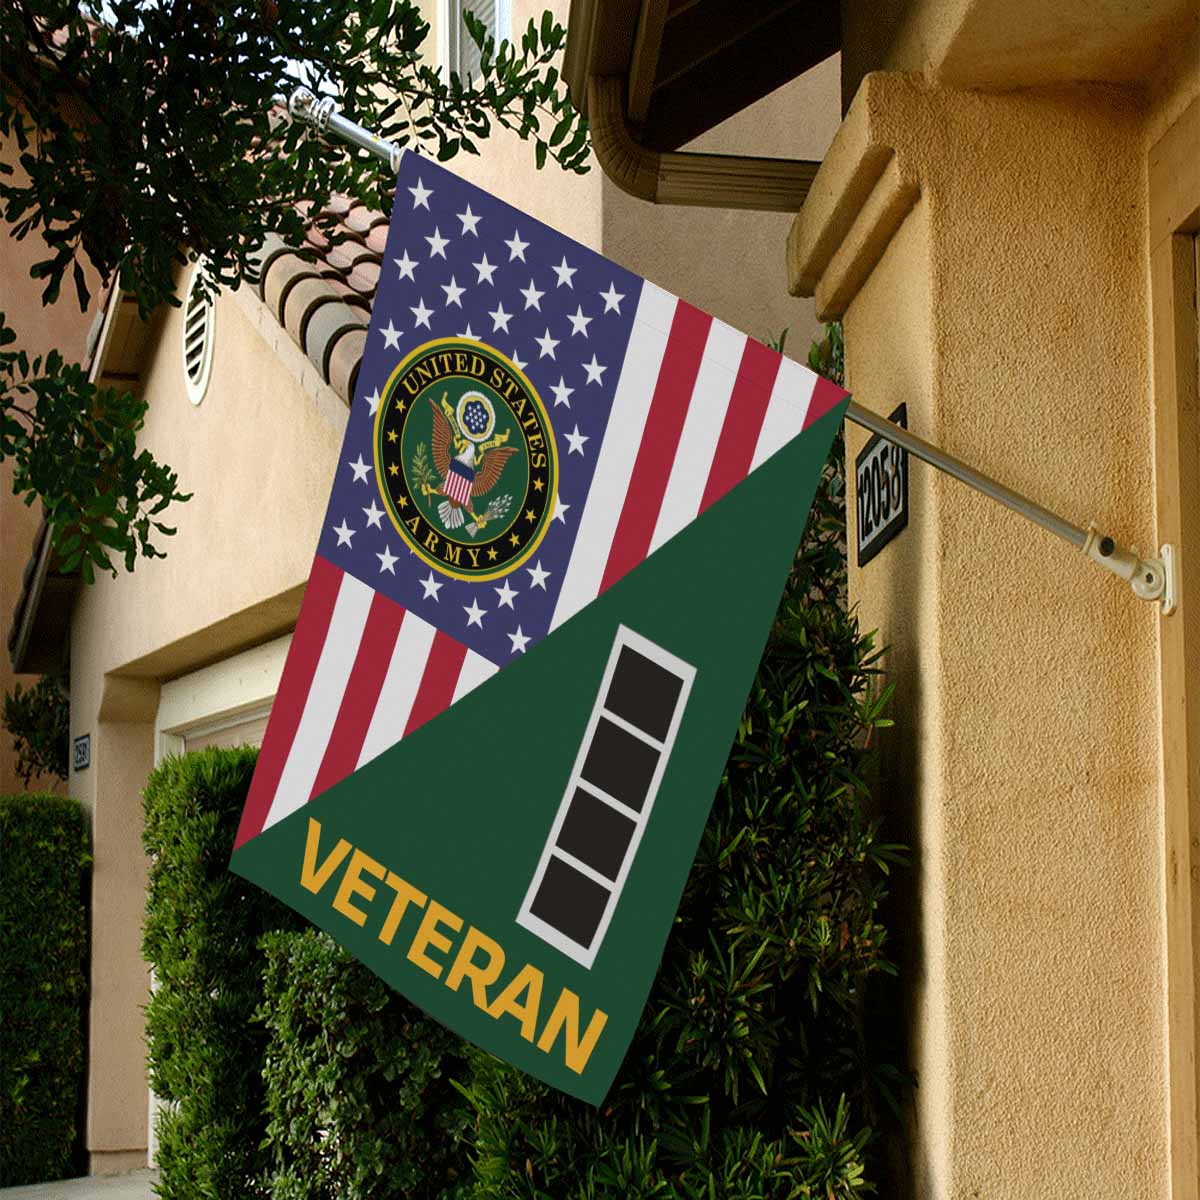 US Army W-4 Chief Warrant Officer 4 Veteran House Flag 28 Inch x 40 Inch 2-Side Printing-HouseFlag-Army-Ranks-Veterans Nation